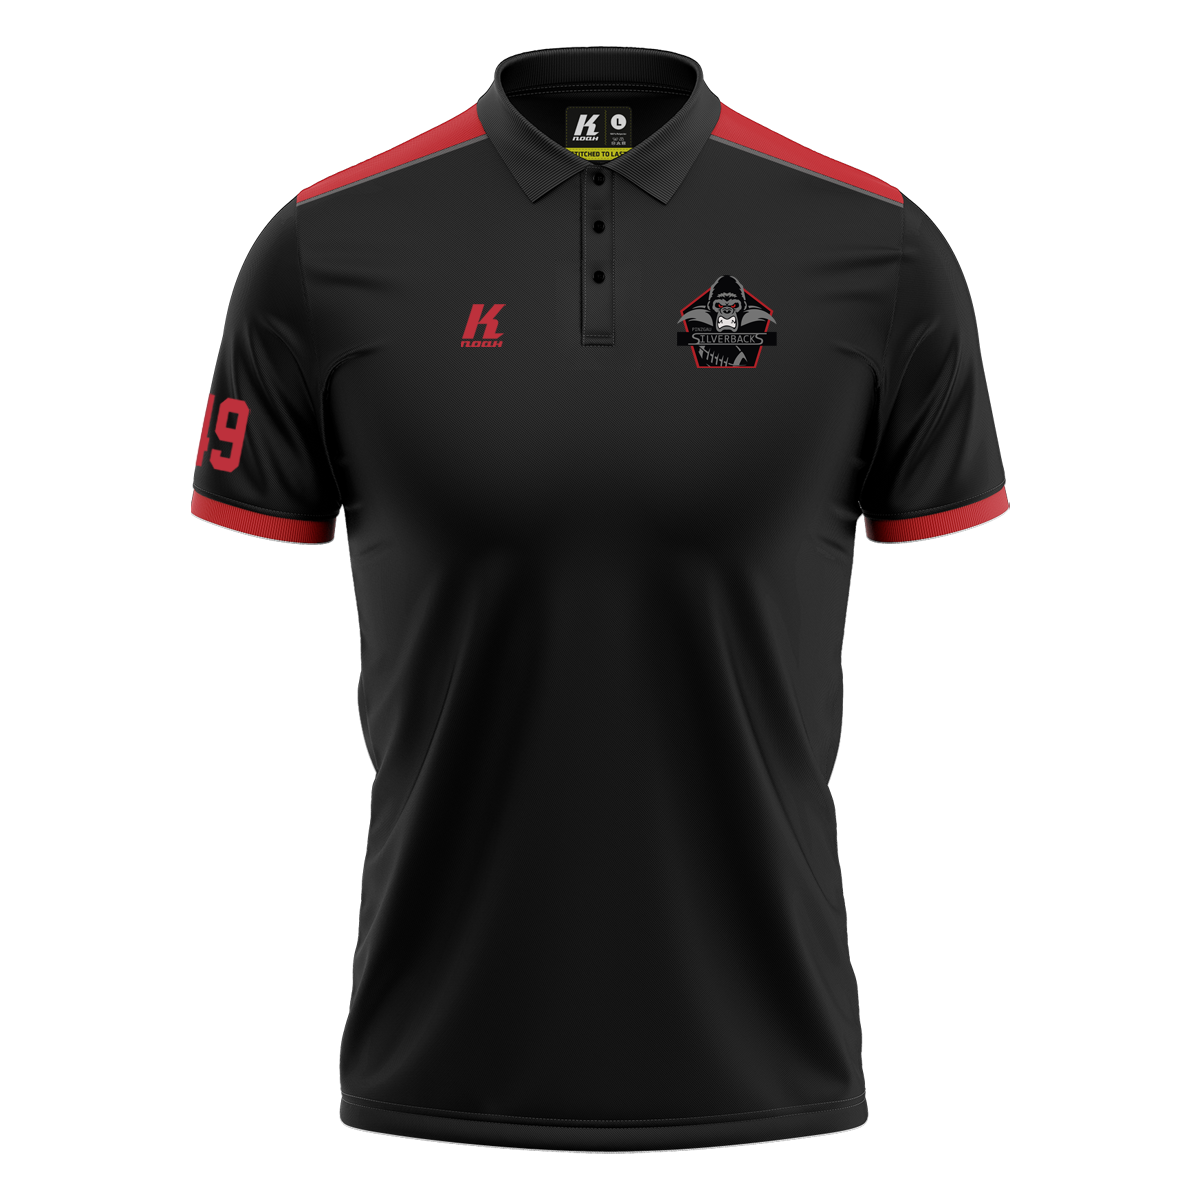 Silverbacks K.Tech-Fiber Polo “Heritage” with Playernumber/Initials